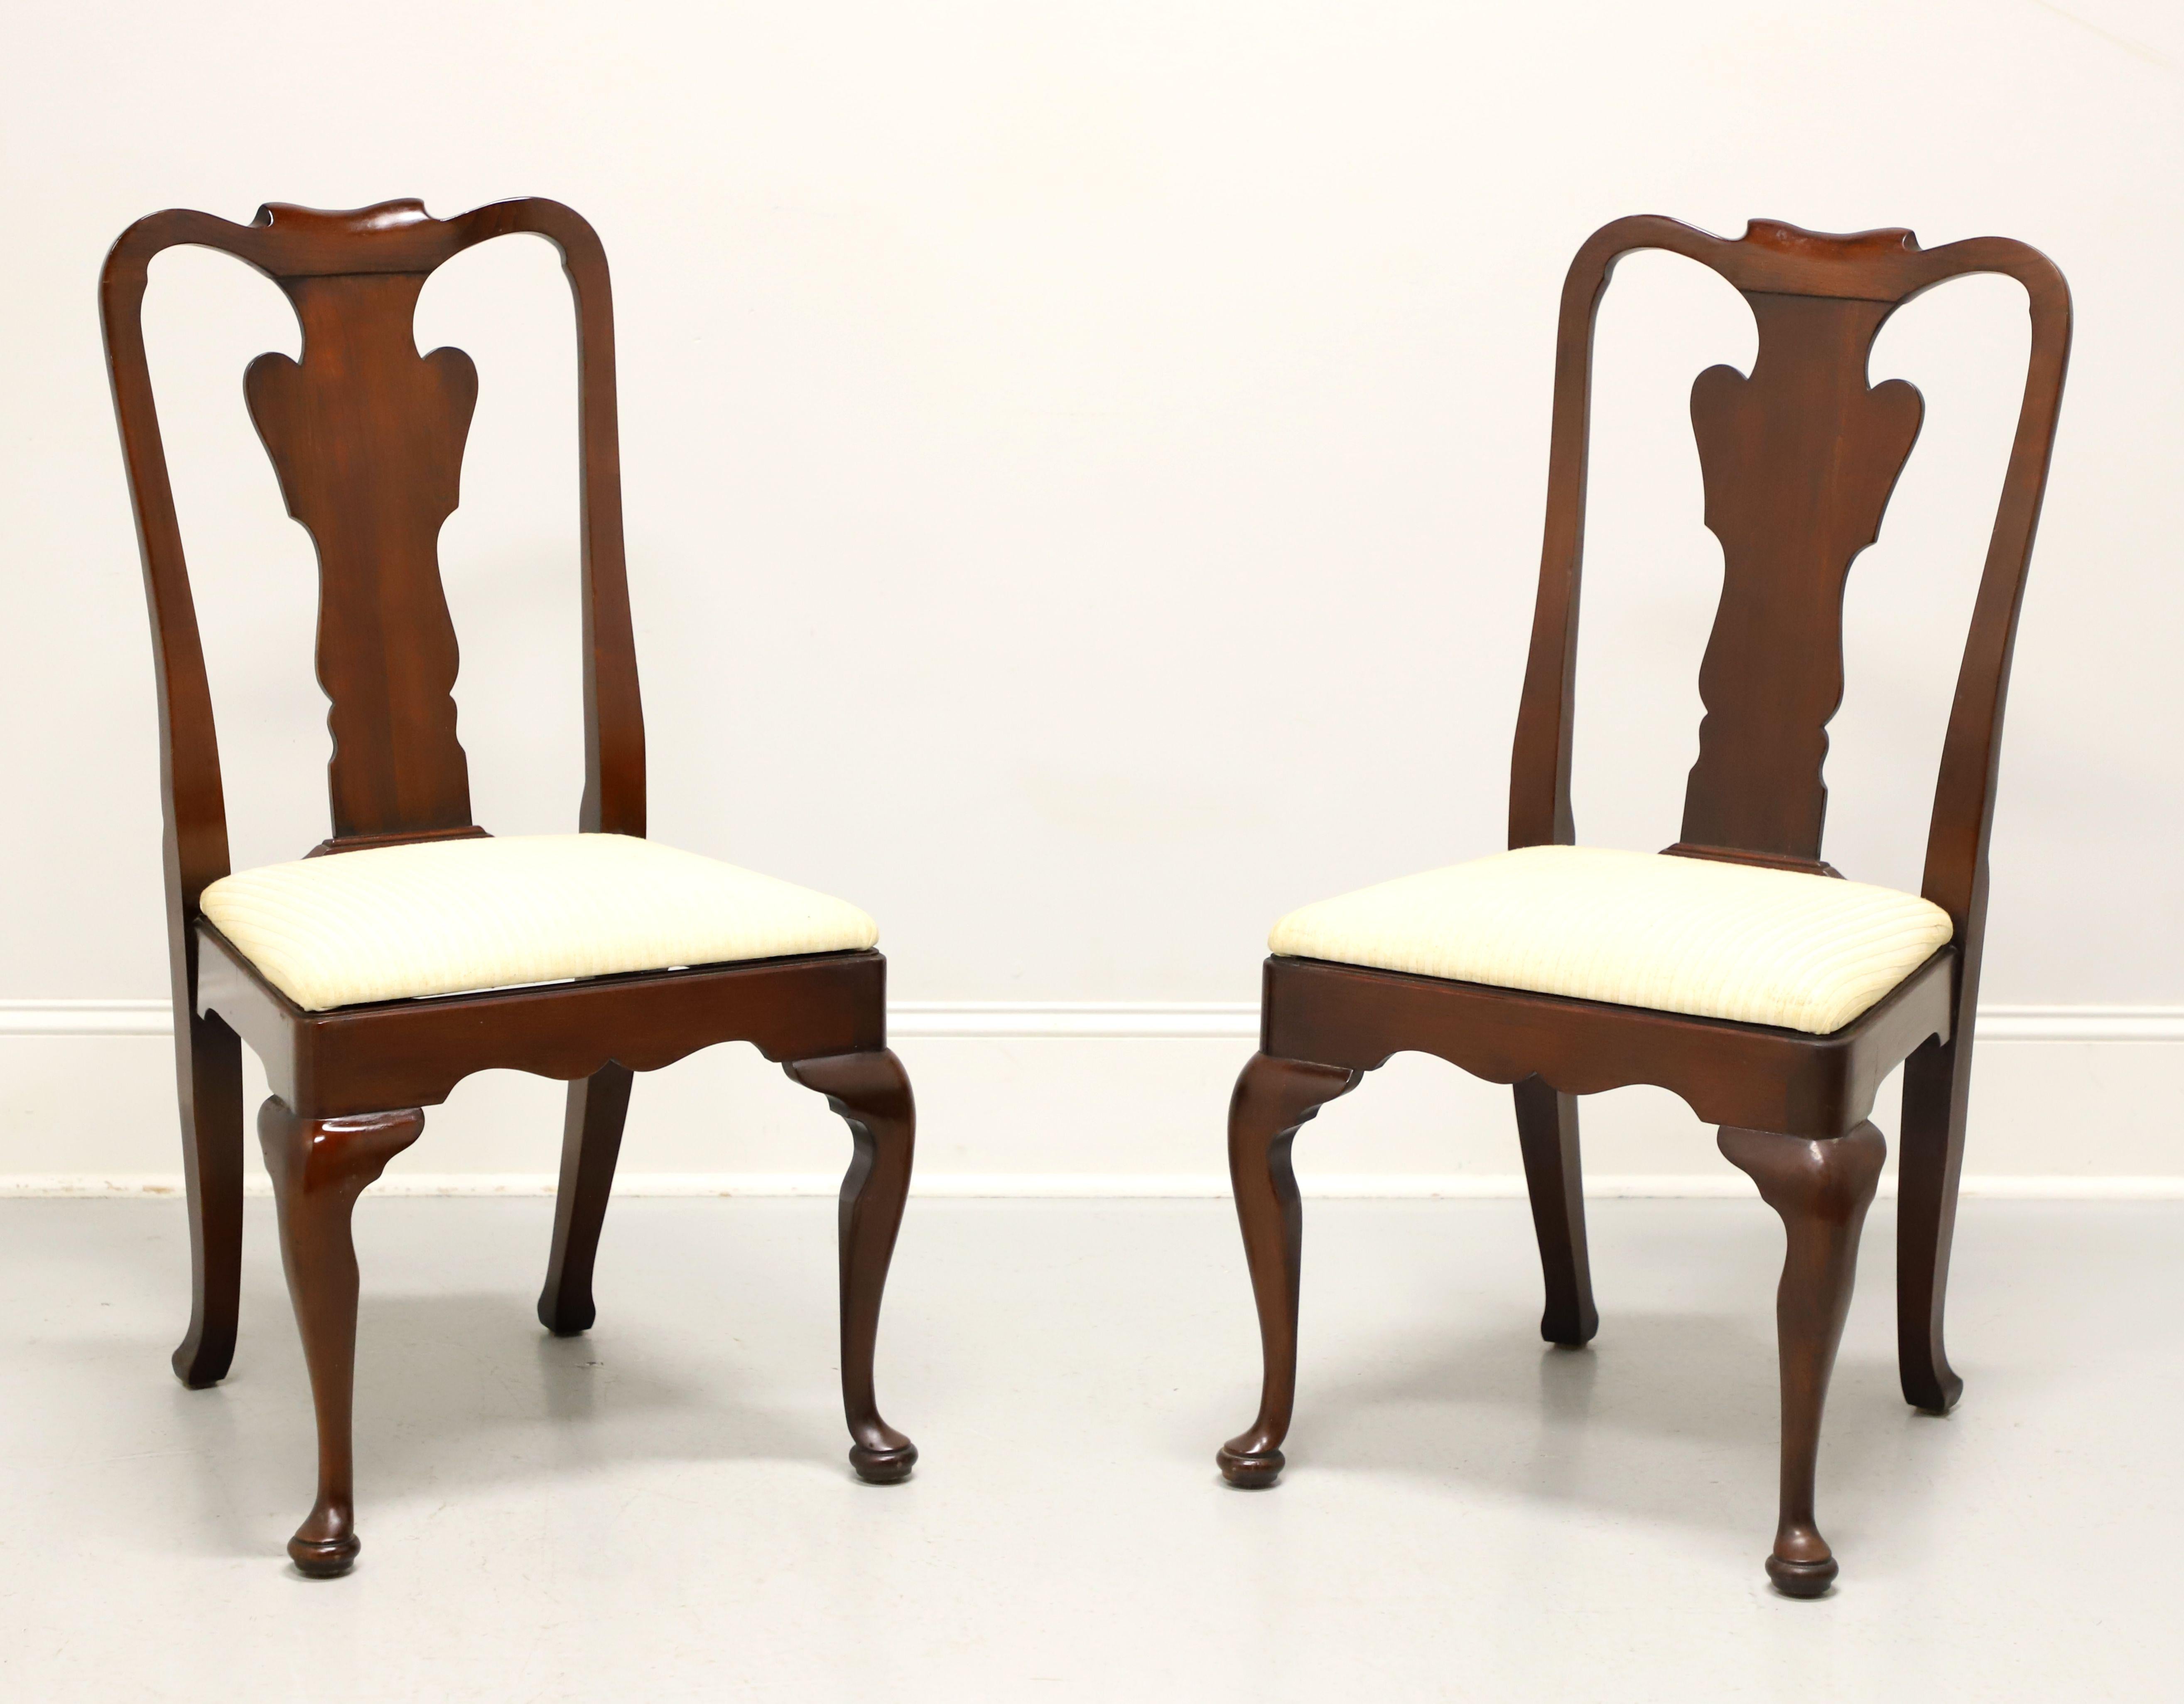 STATTON Old Towne Cherry Queen Anne Dining Side Chairs - Pair B 6